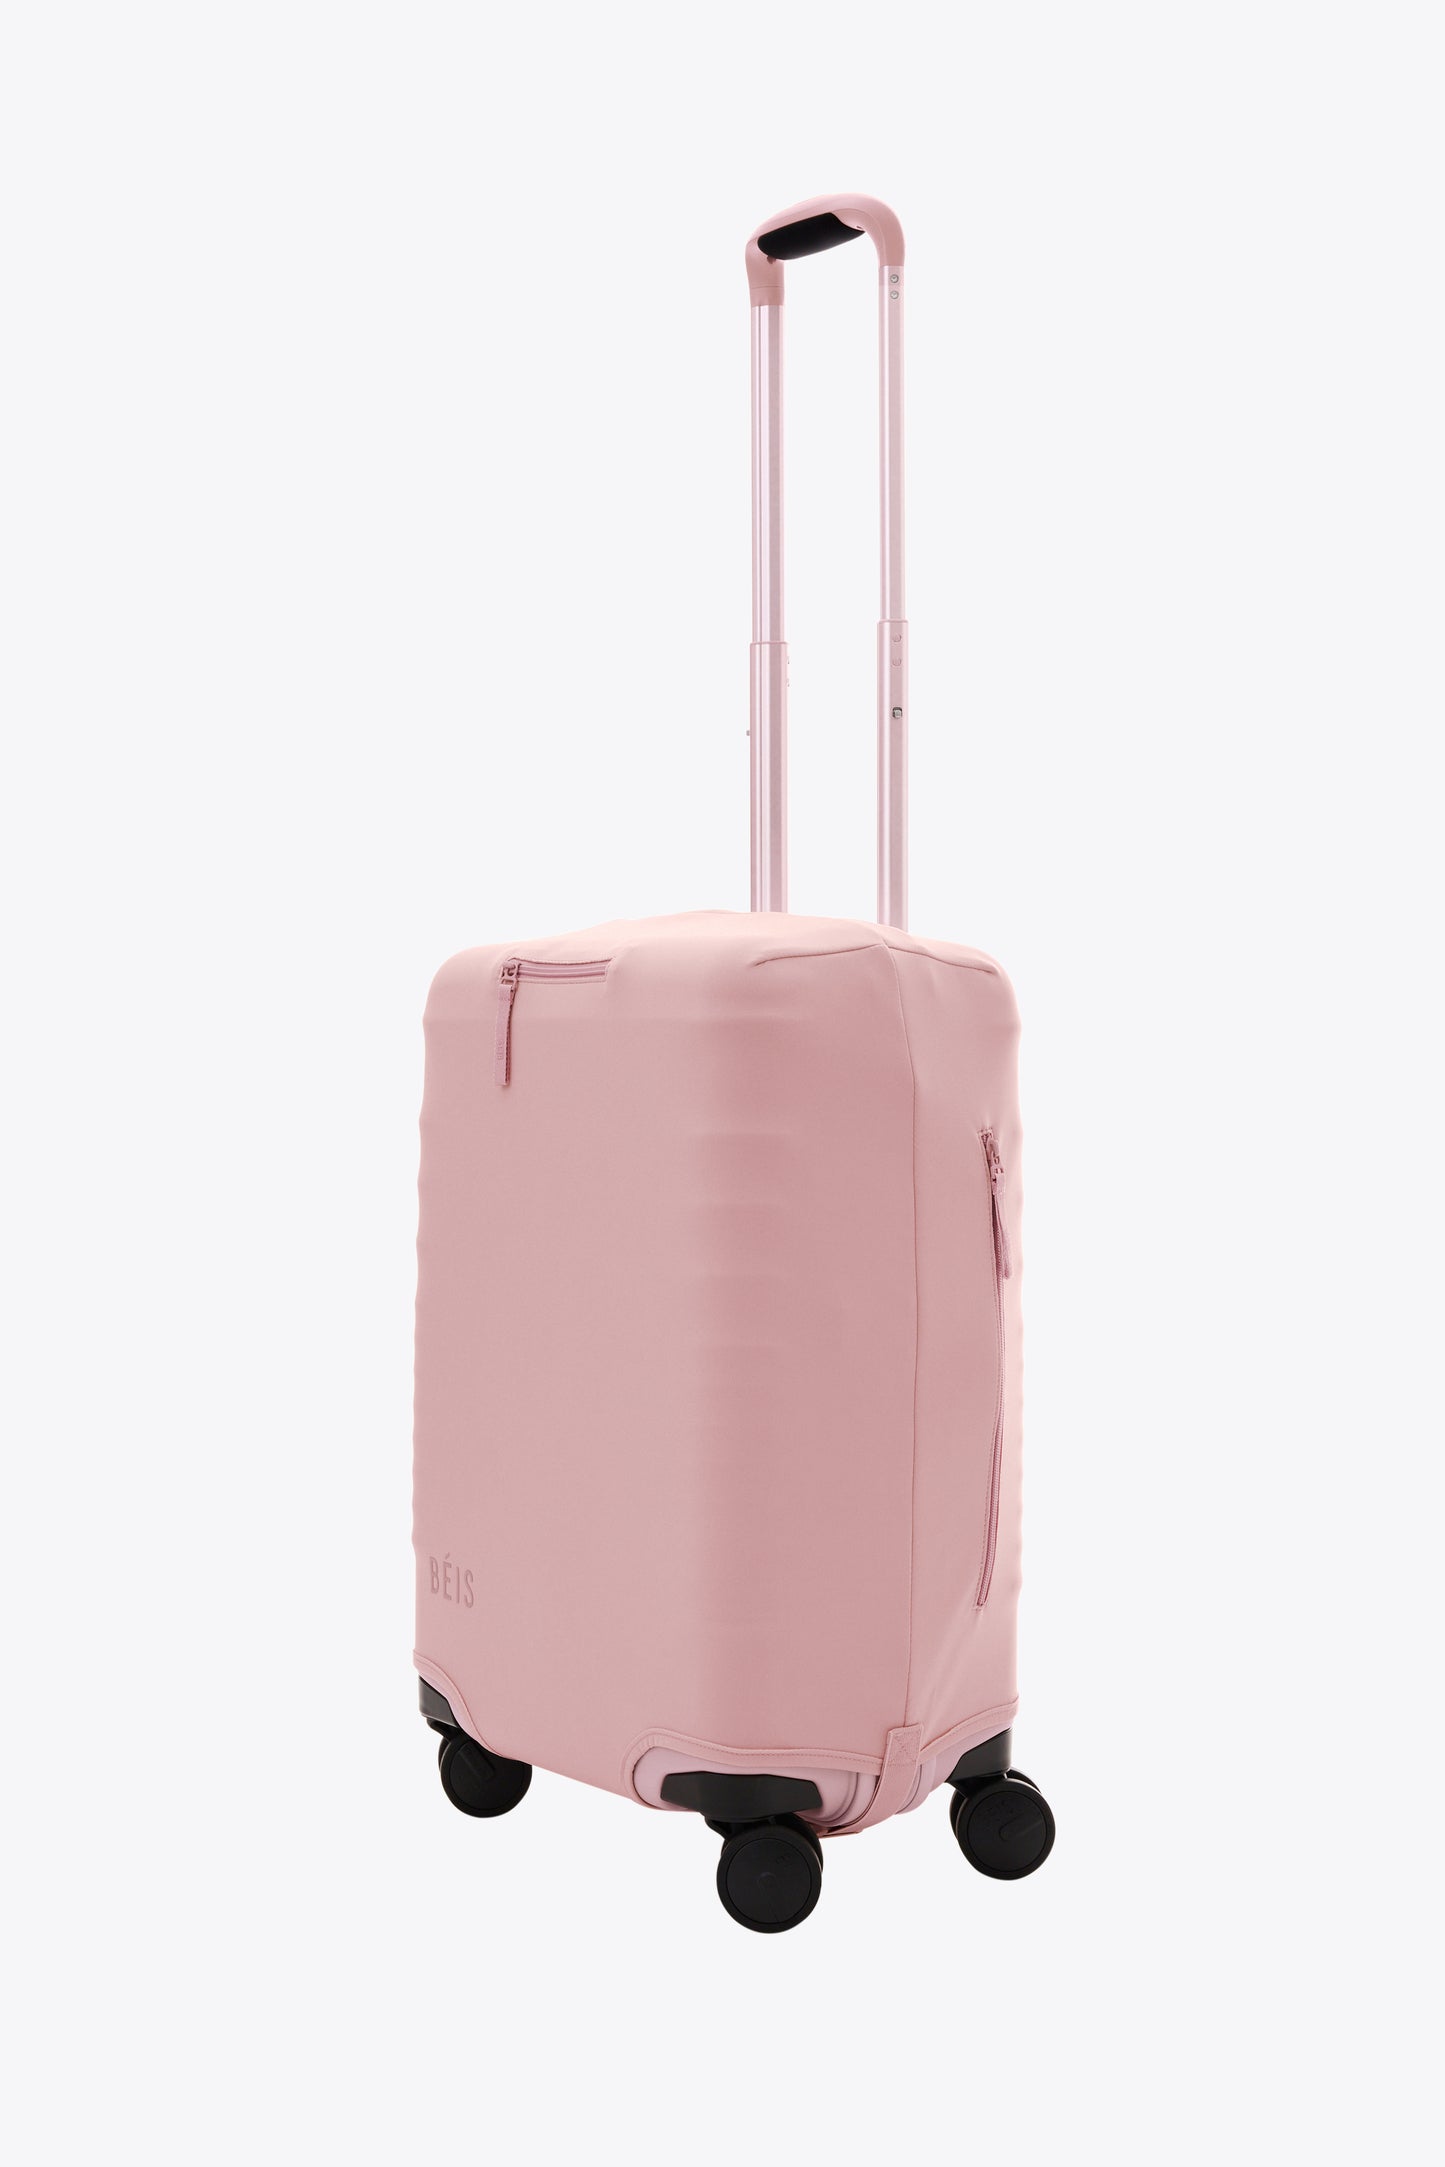 The Carry-On Luggage Cover in Atlas Pink